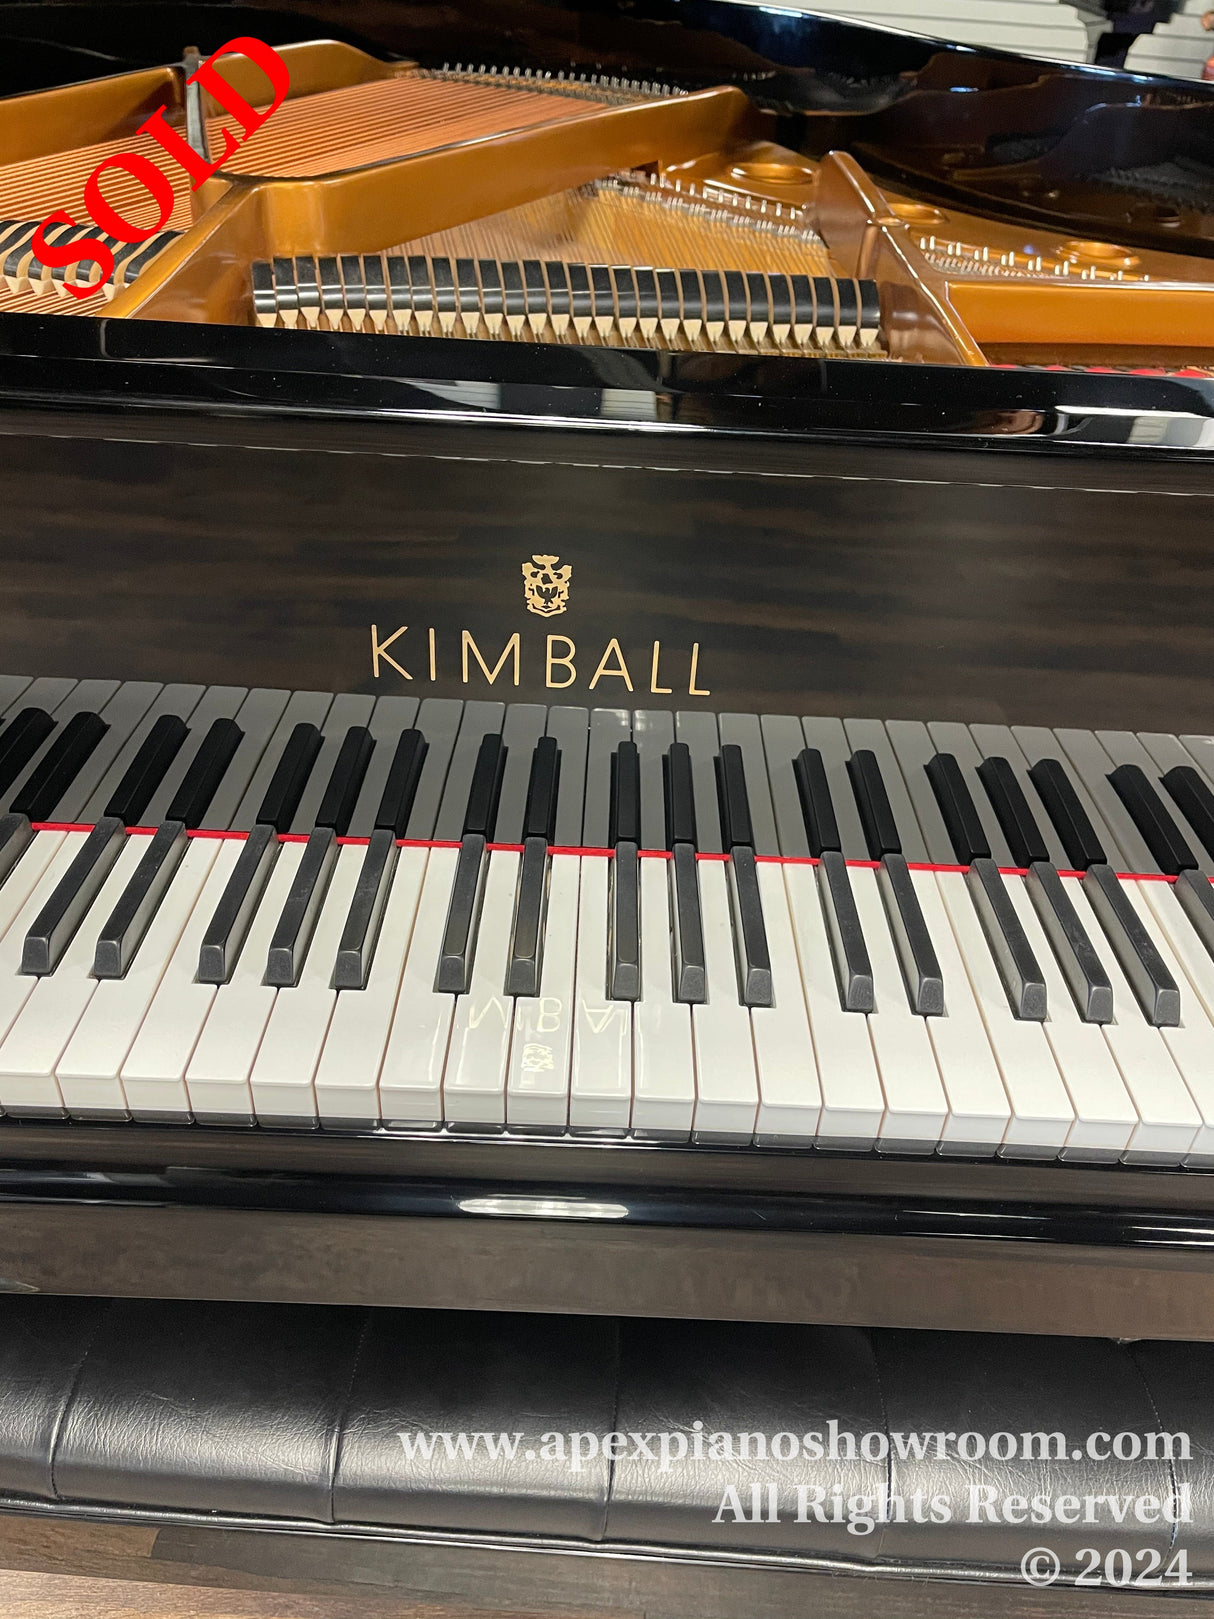 A glossy black Kimball grand piano with a visible brand logo, showcasing white and black keys and the interior golden harp and strings, on a showroom floor.